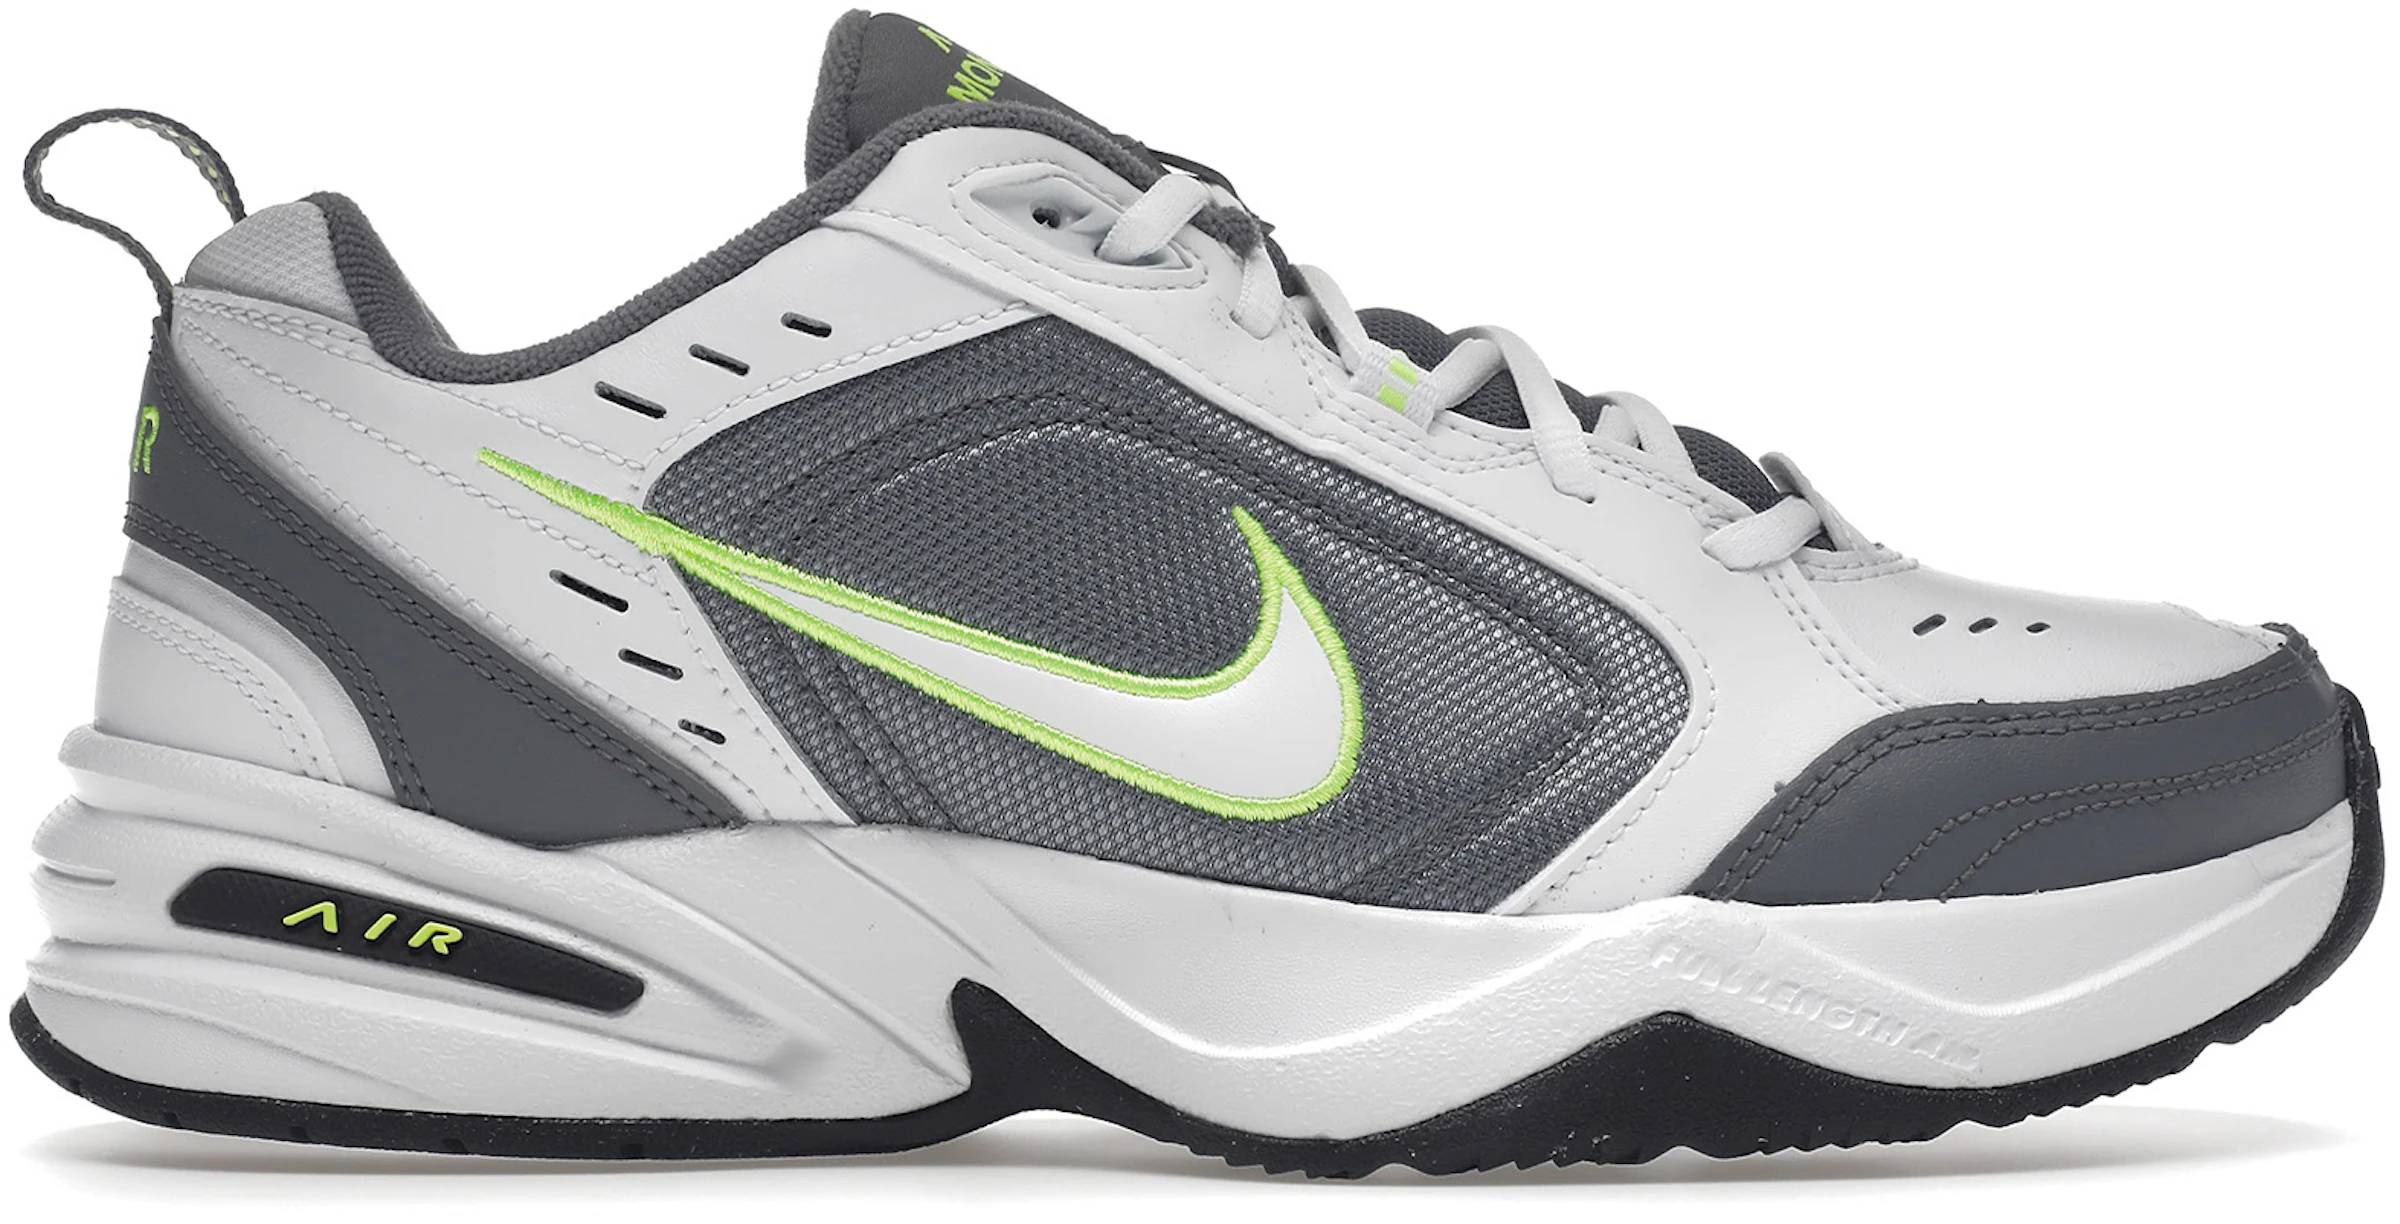 Nike Air Monarch White/Cool Grey/Anthracite/White - 415445-100 -